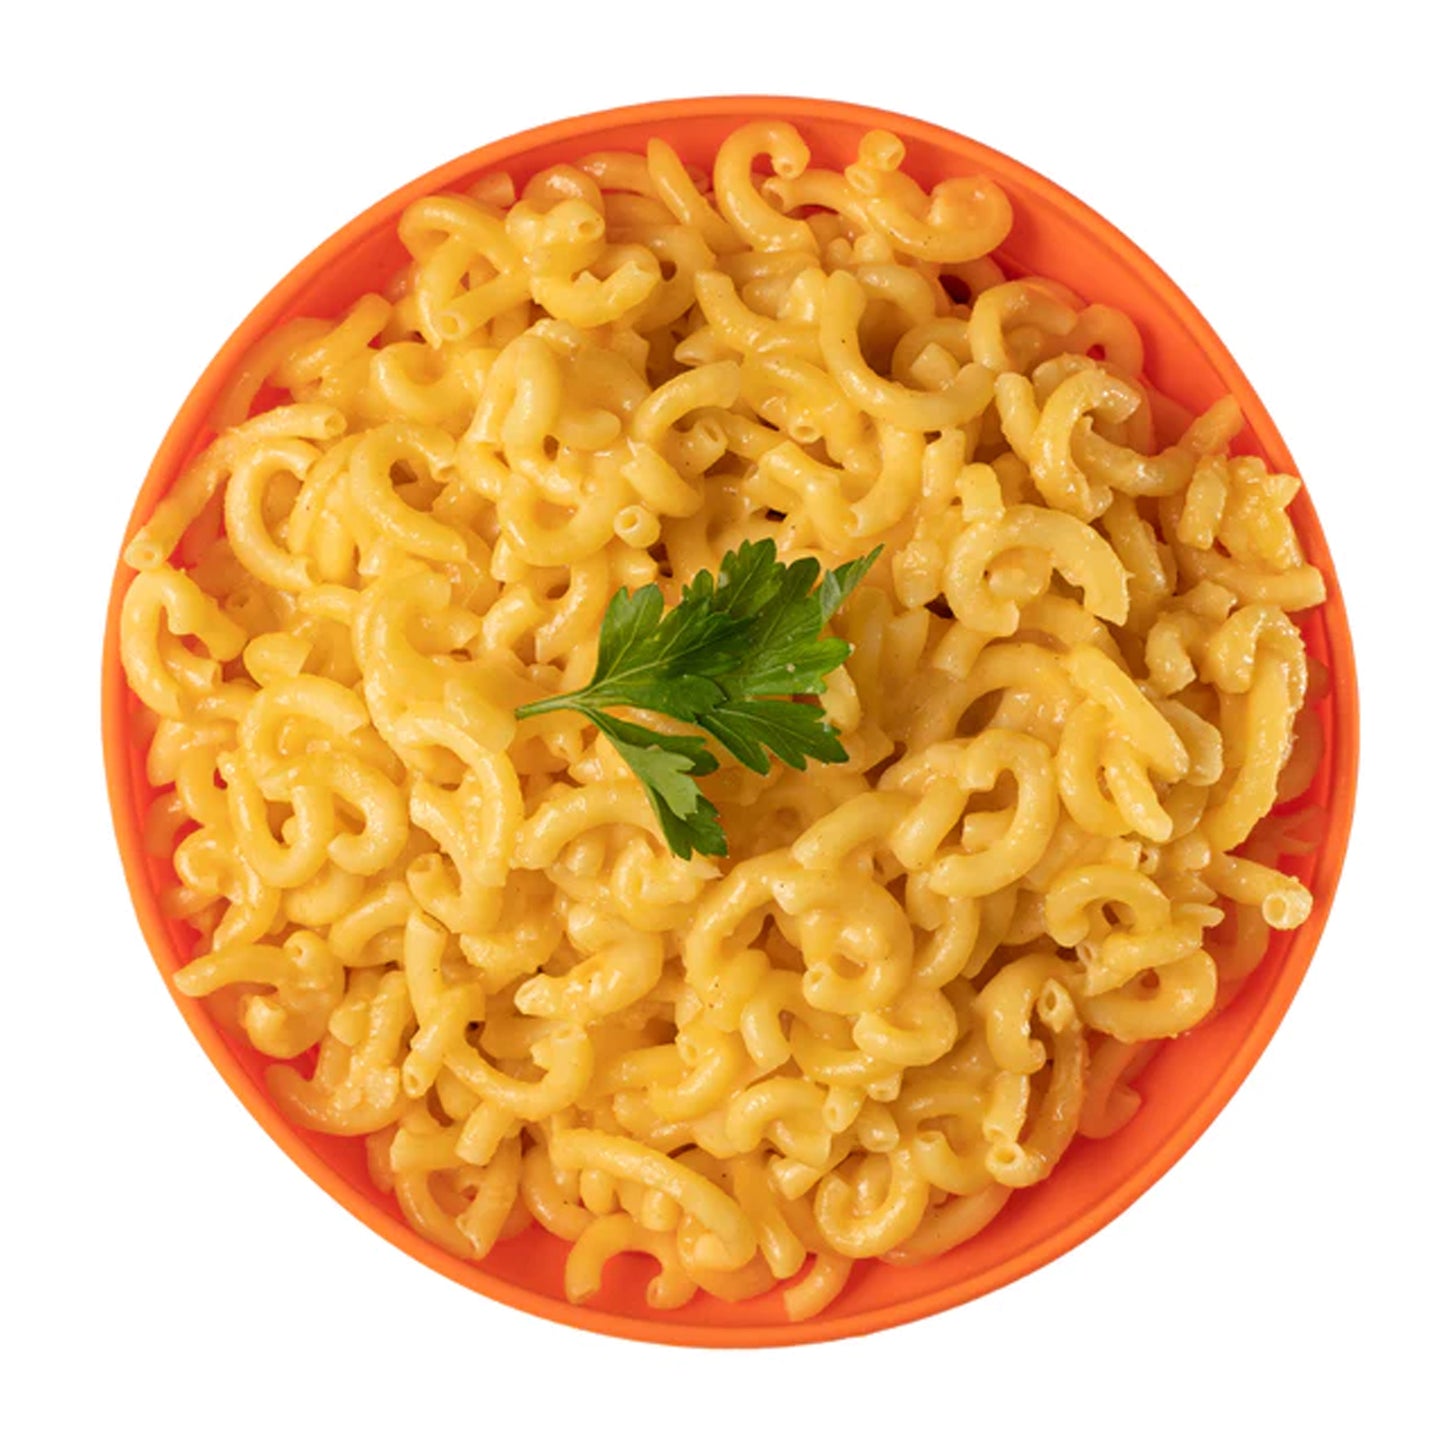 Macaroni and Cheese Freeze Dried Meal